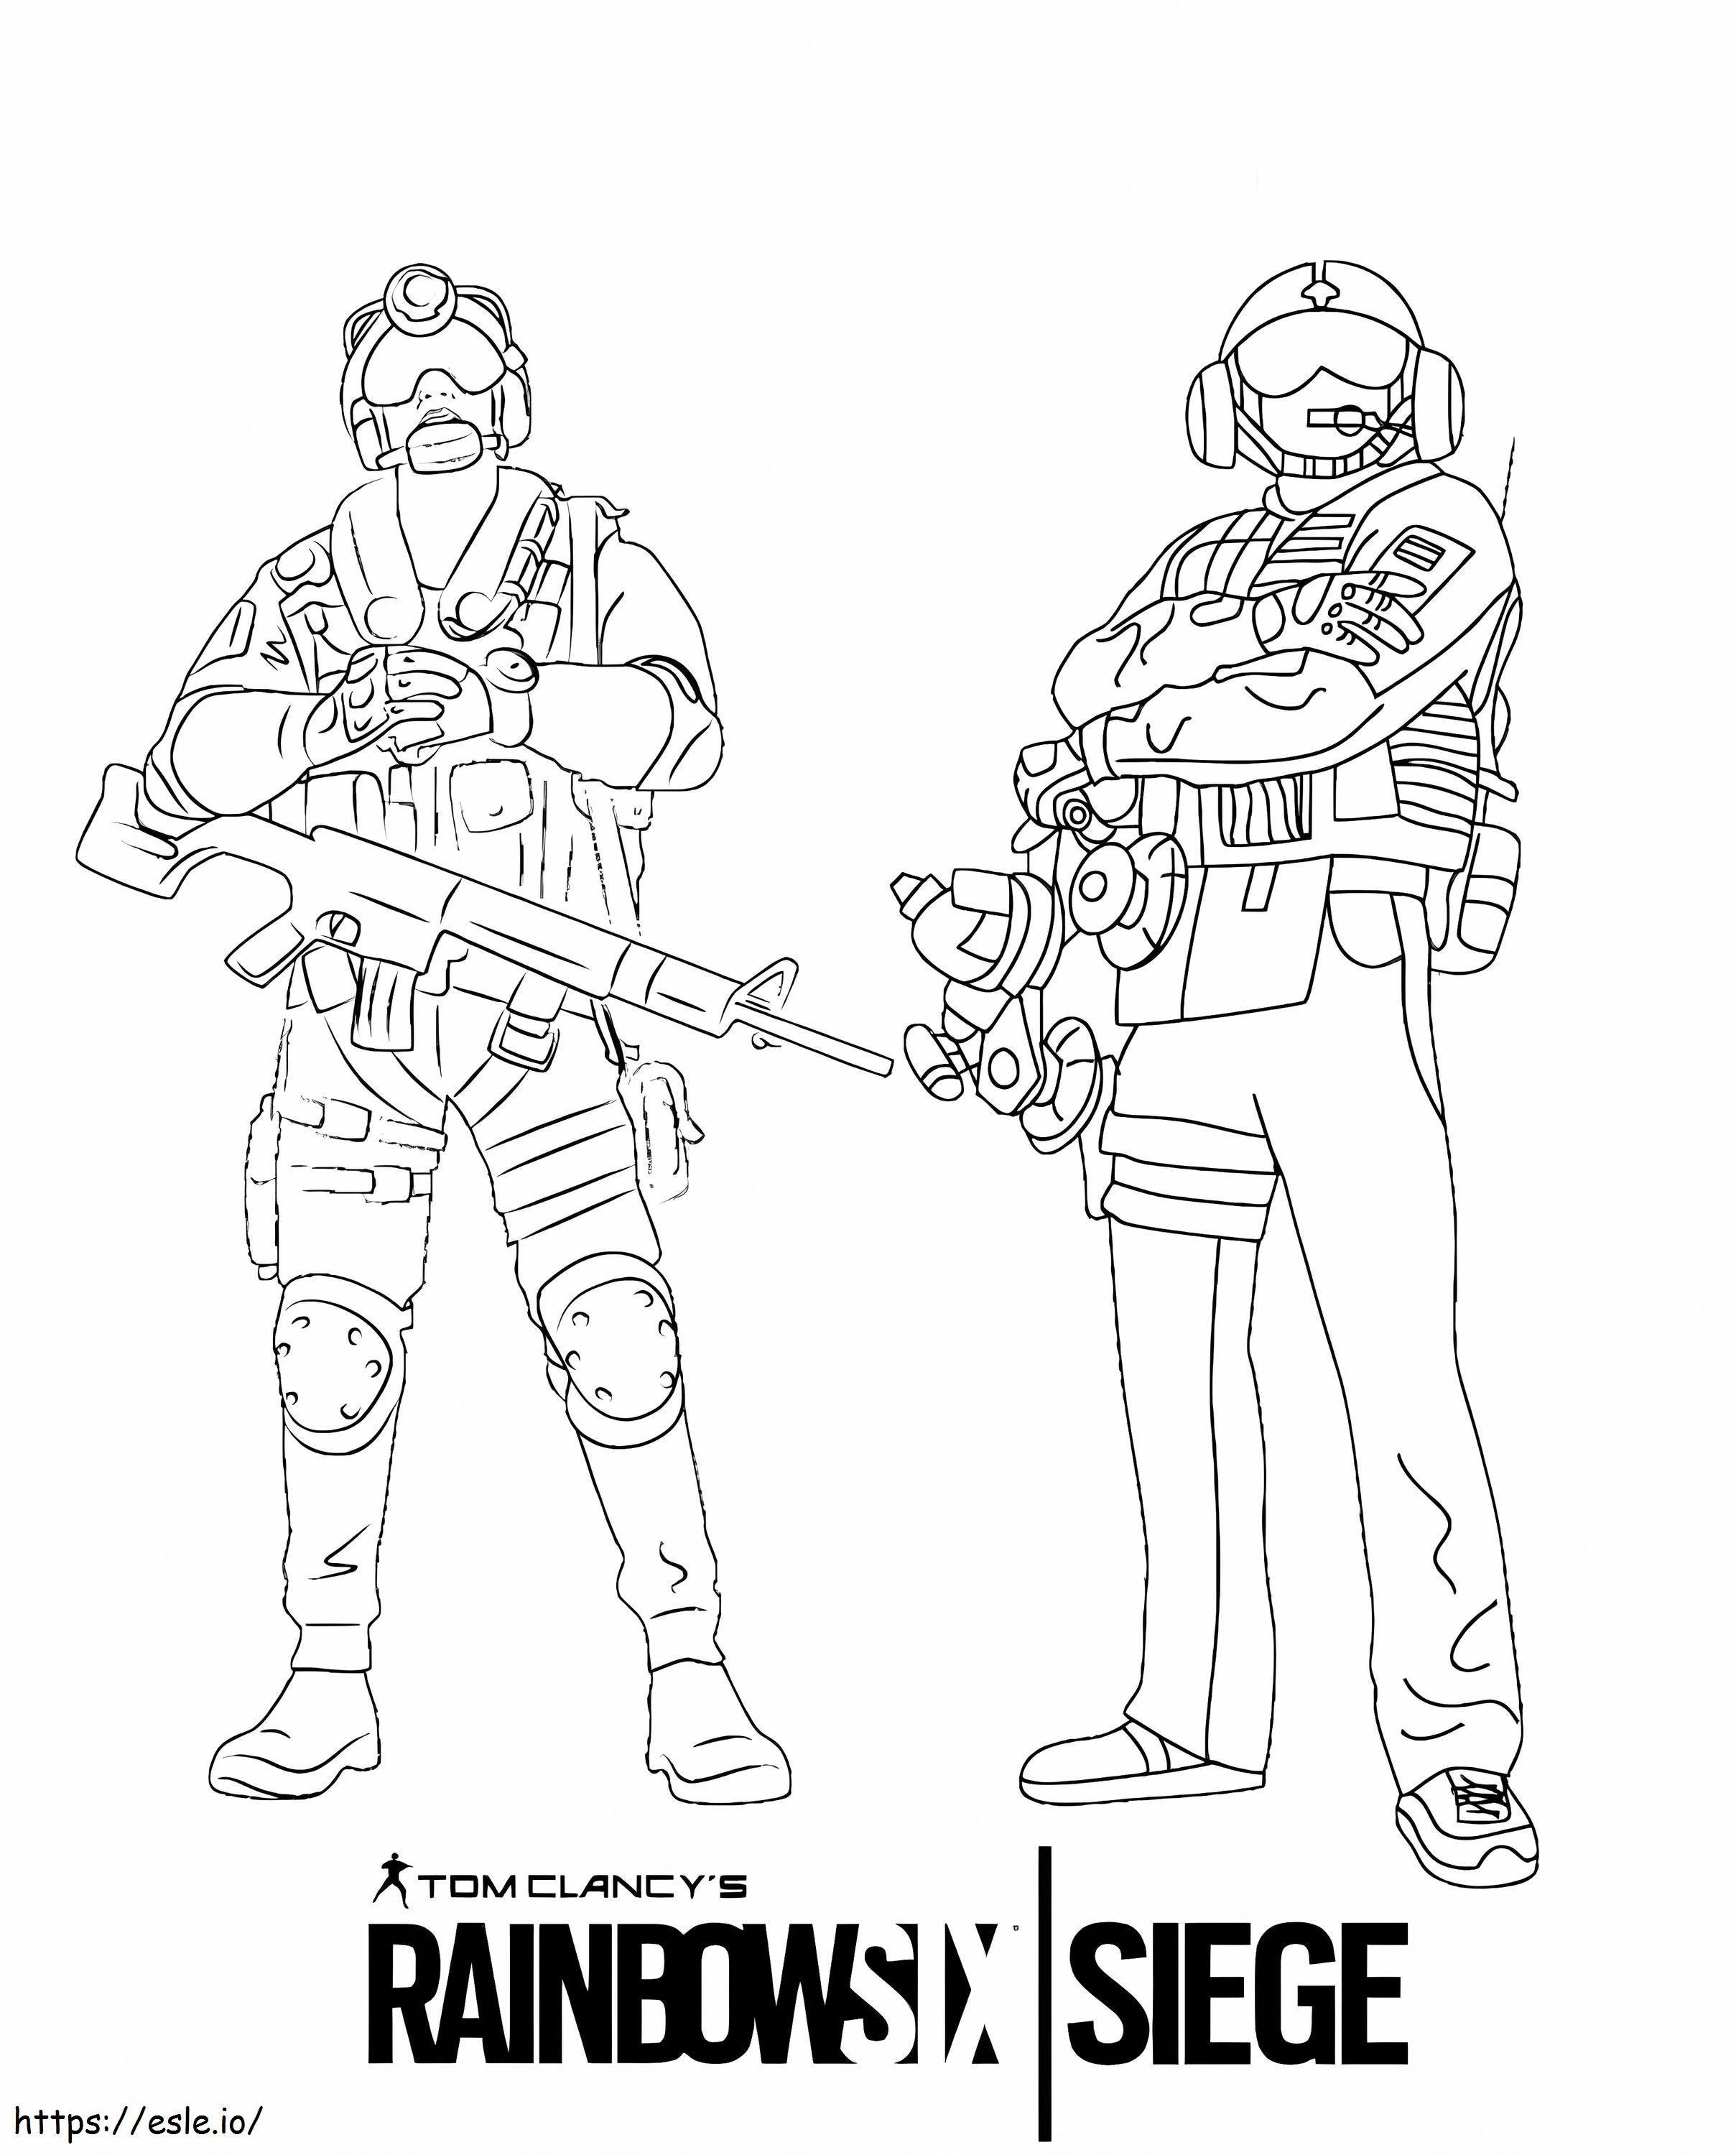 Chacal e Jager Rainbow Six Siege para colorir